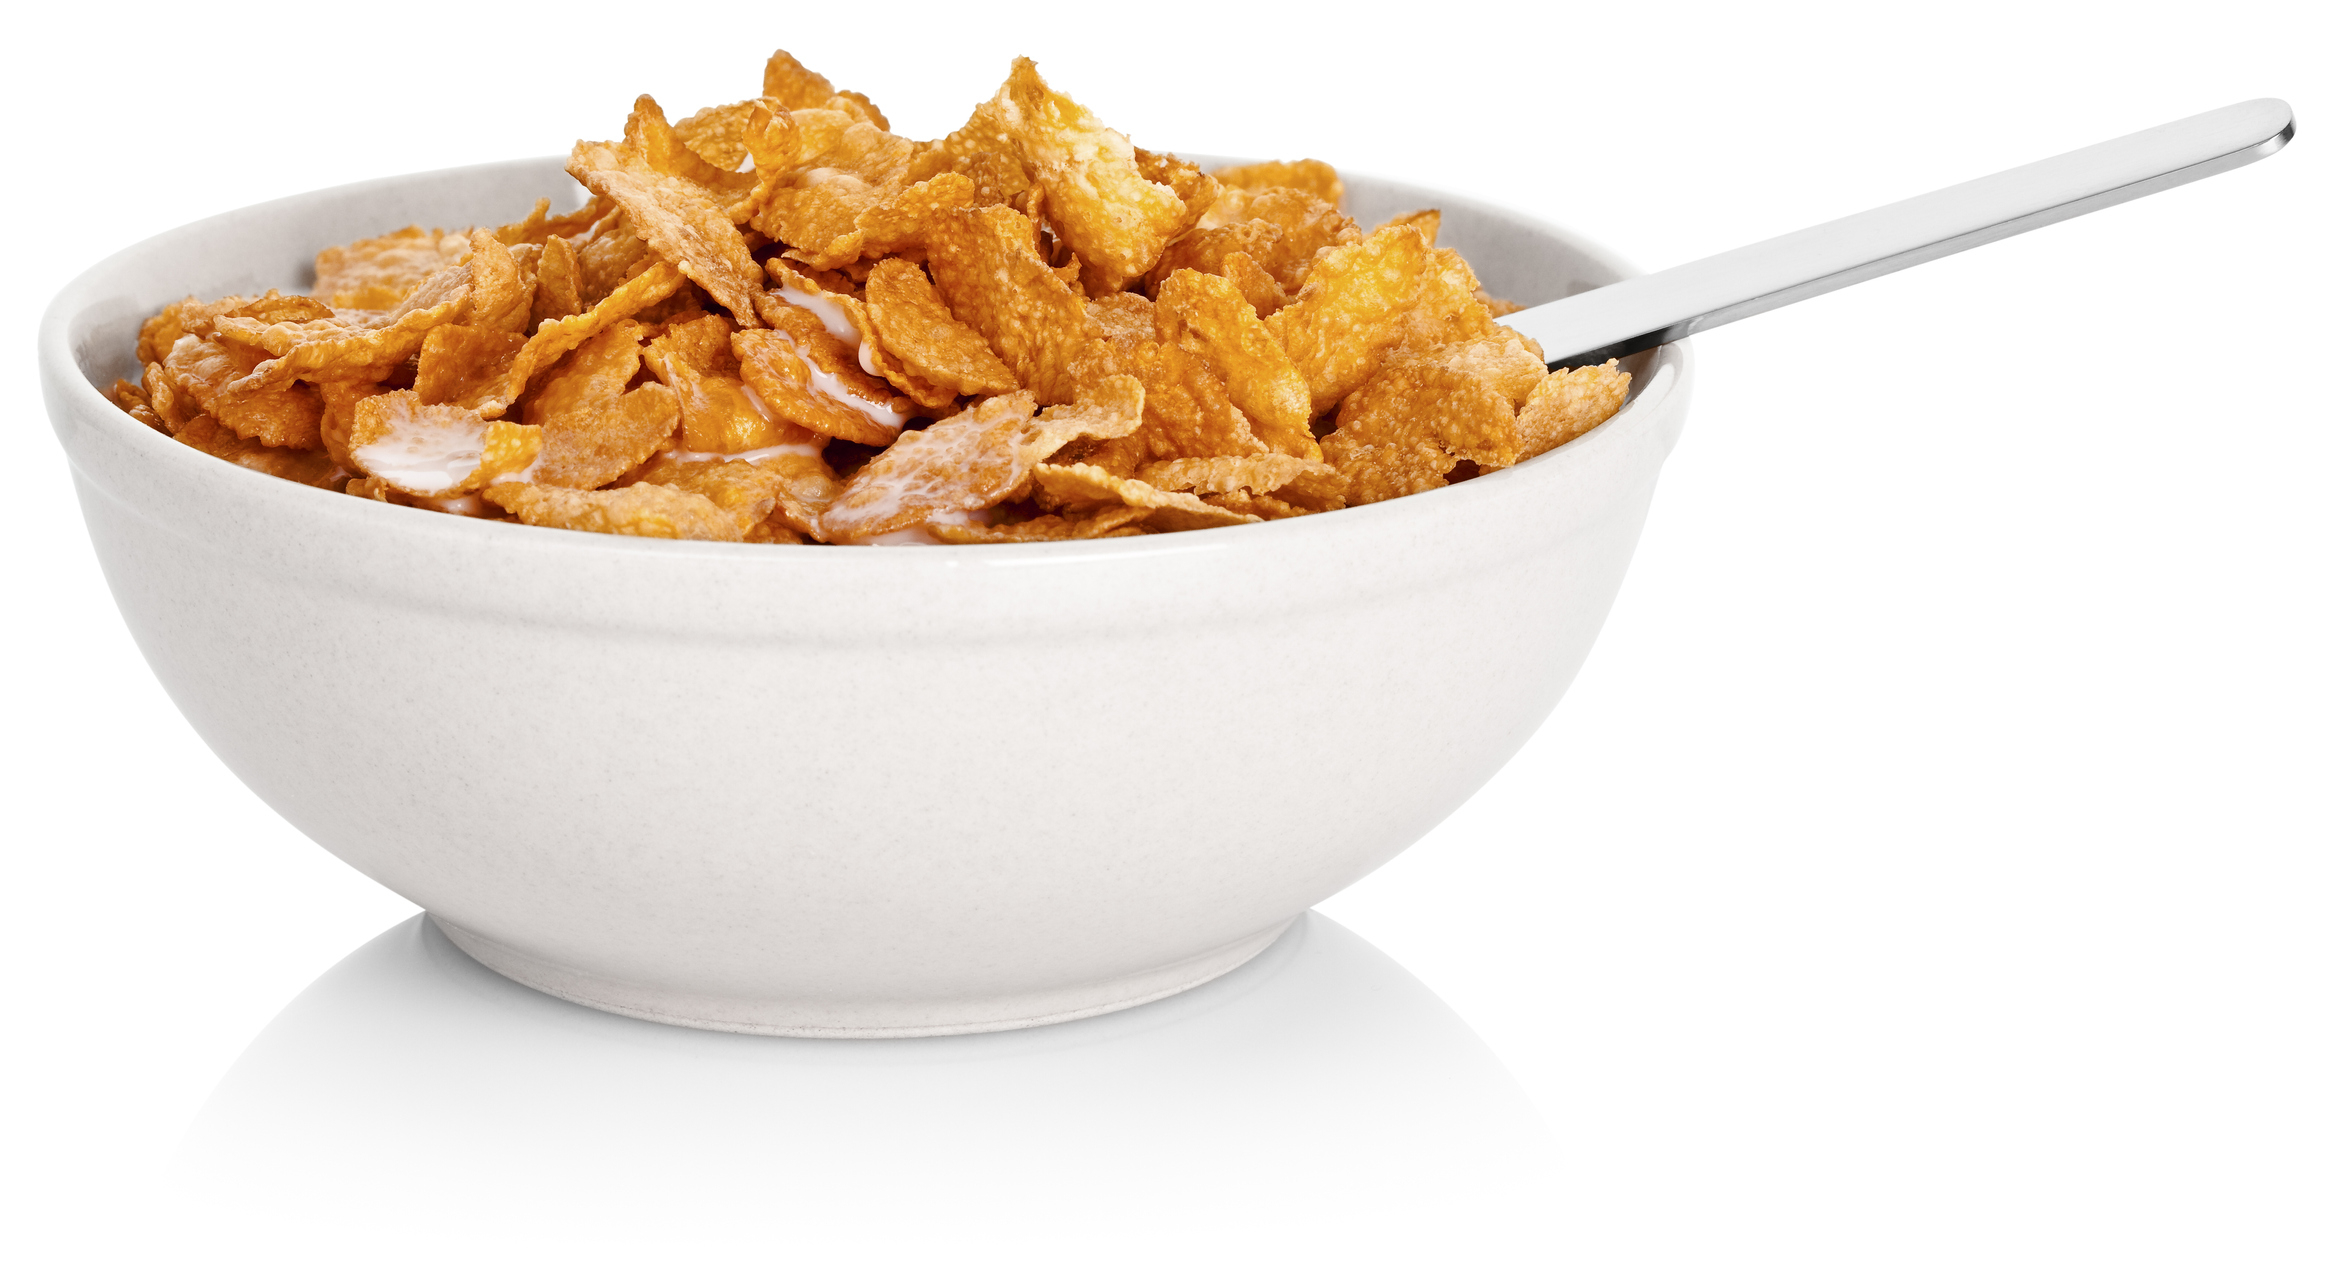 Bowl of cereal with a spoon, on a white background